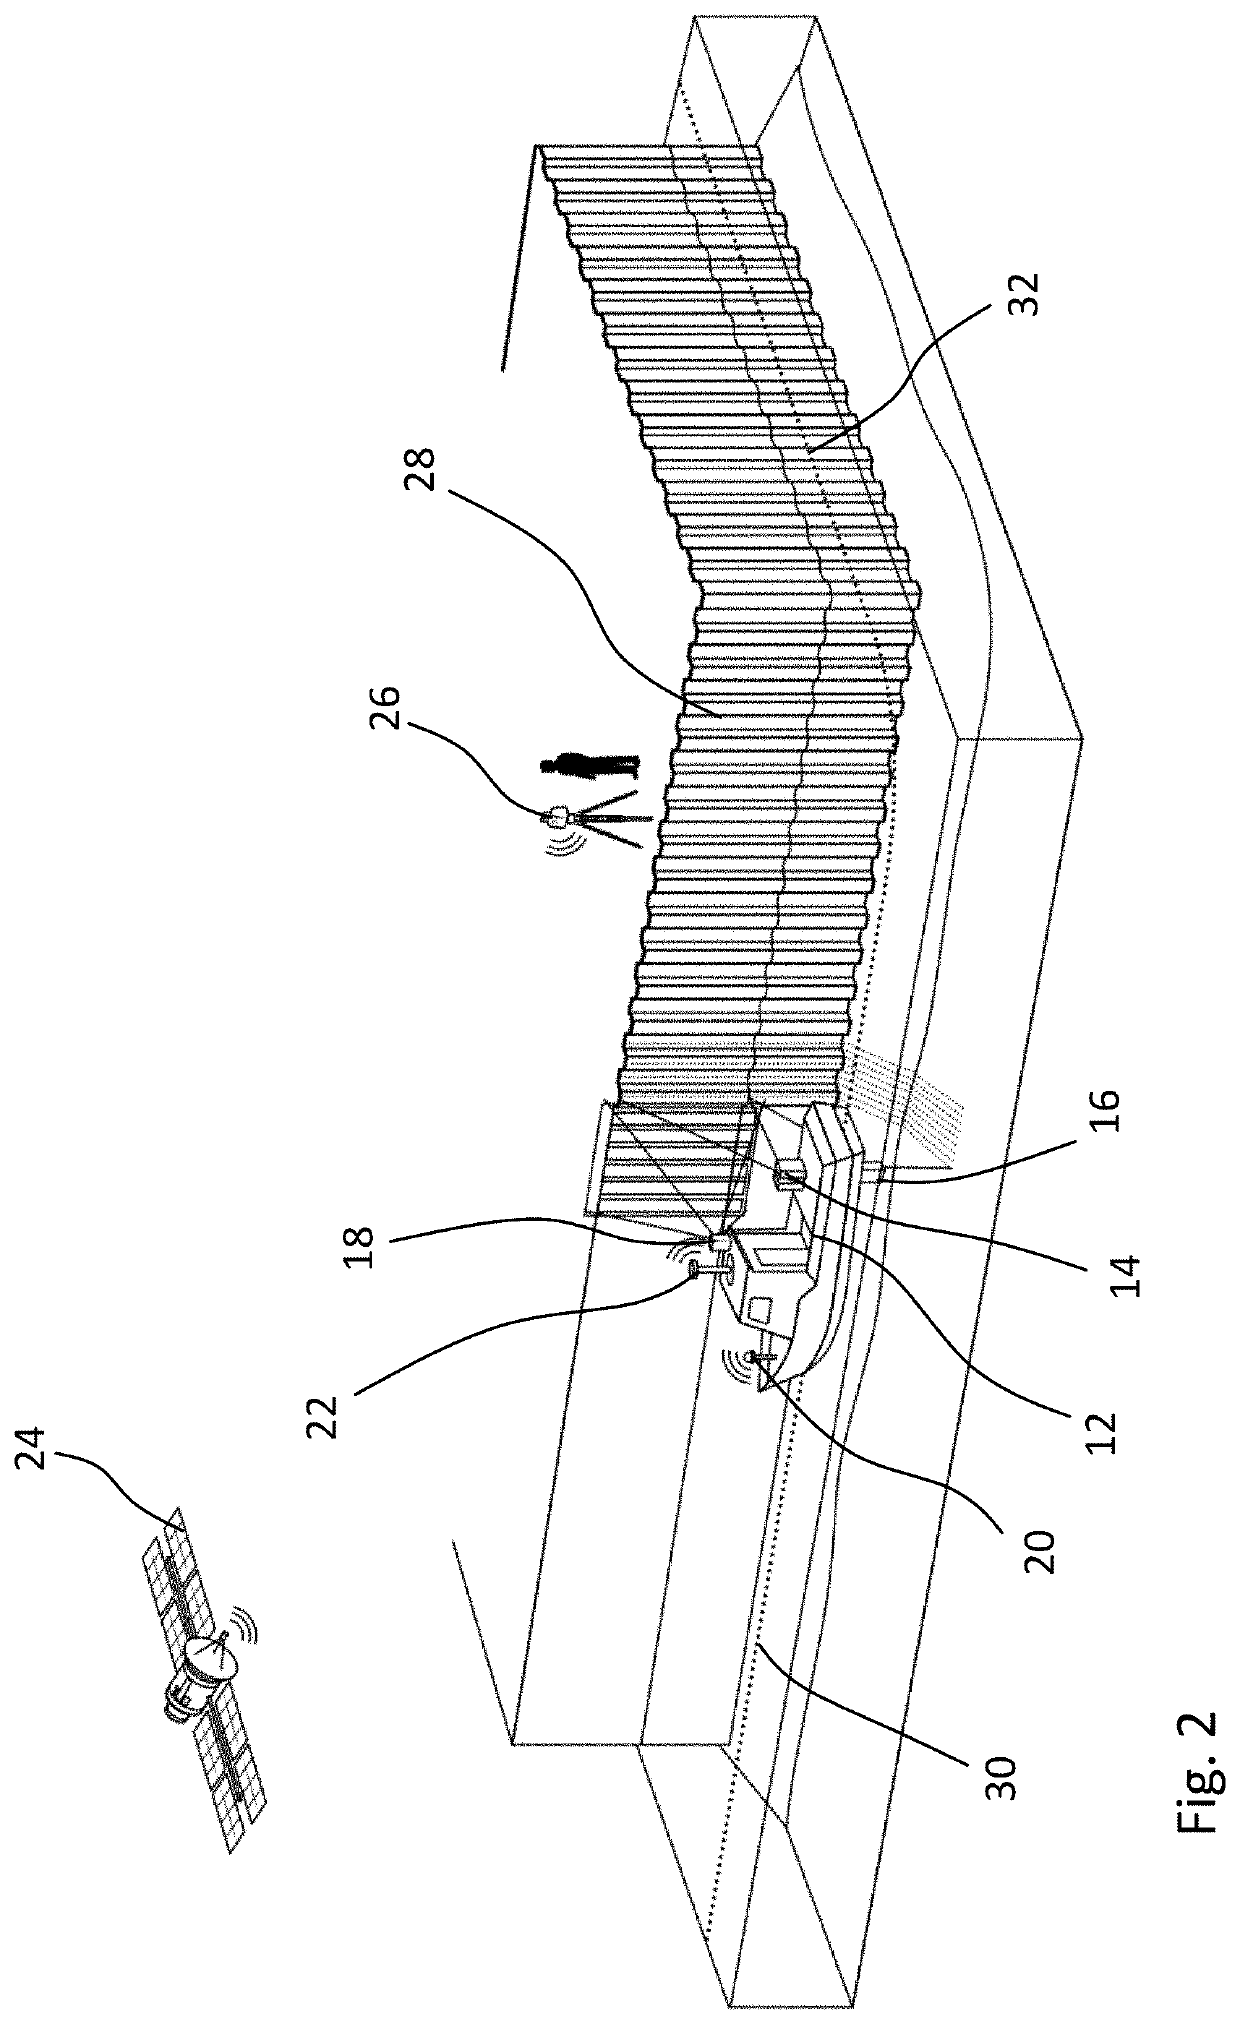 Apparatus for measuring a structure and associated method